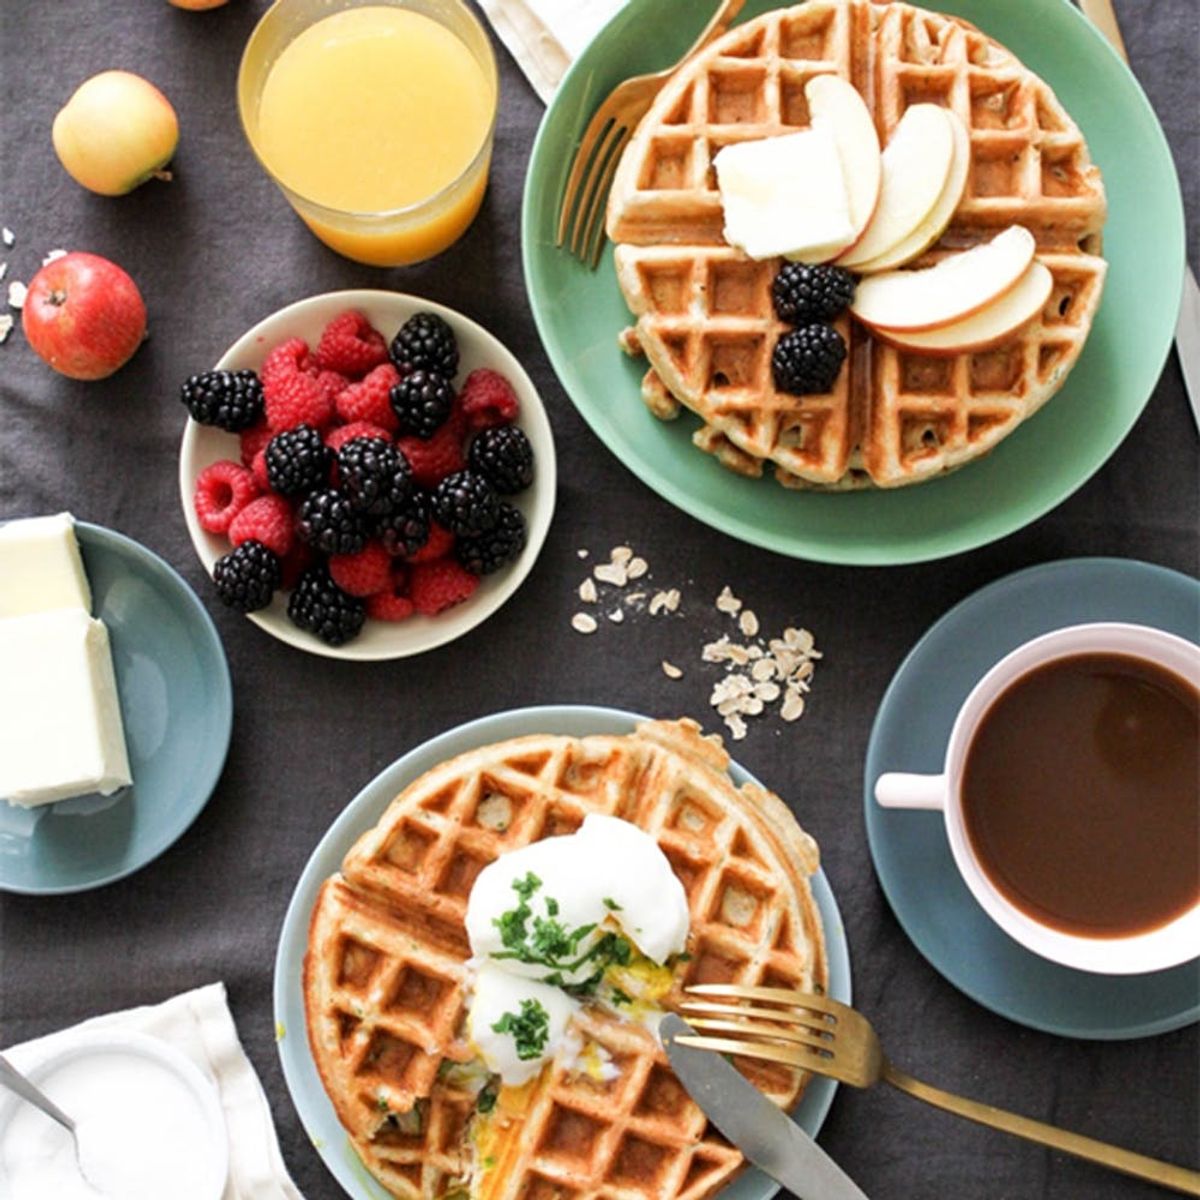 Simplify Your Morning Routine With These #OffYouGo Breakfast Hacks